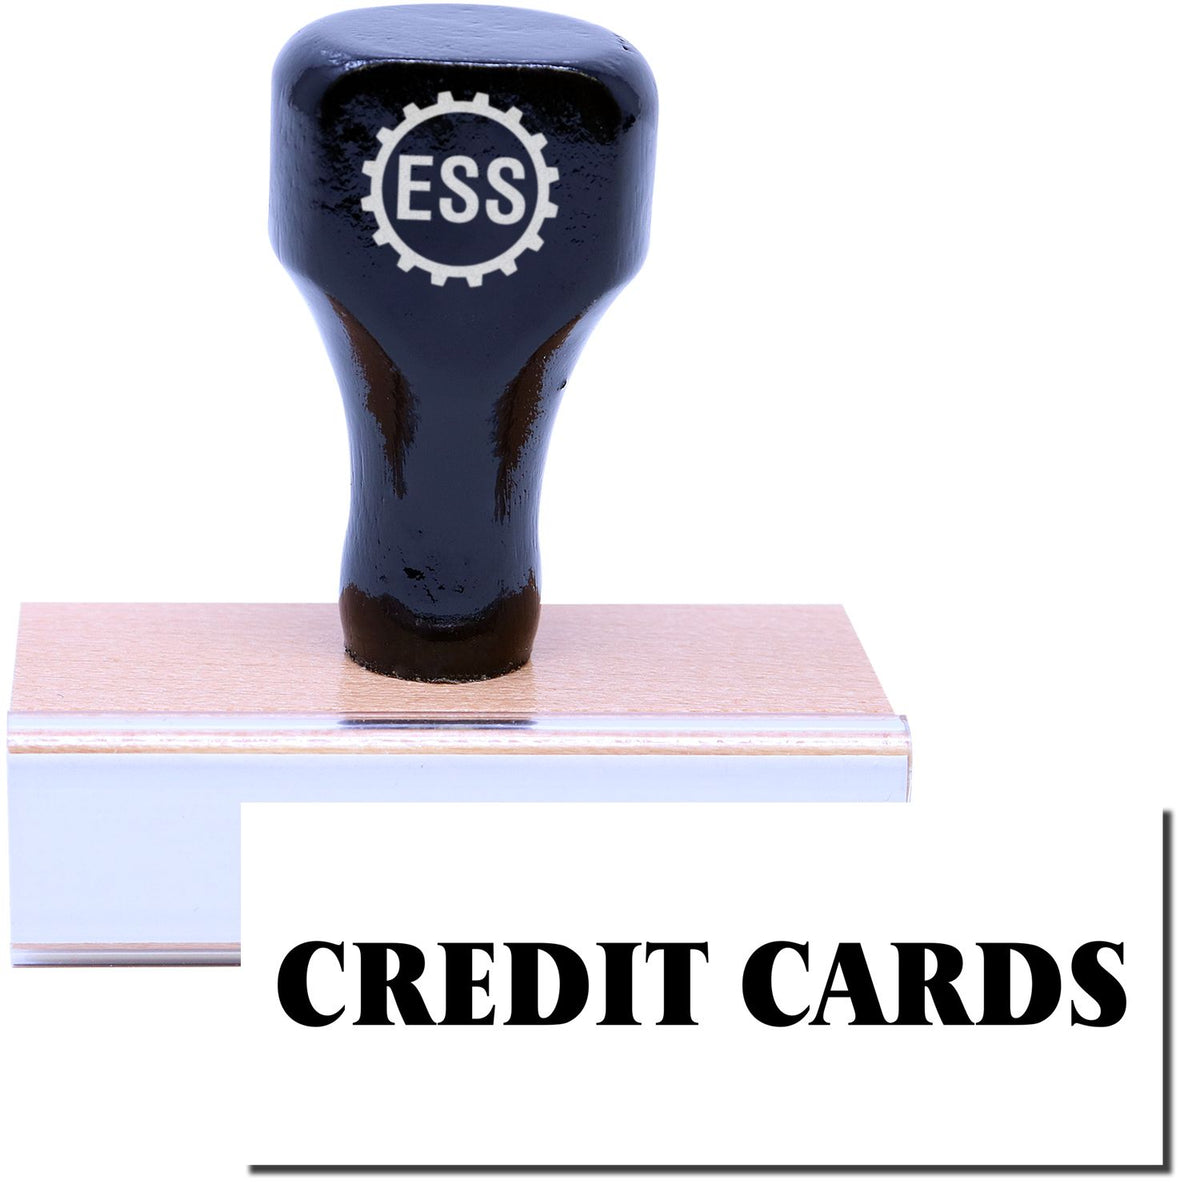 A stock office rubber stamp with a stamped image showing how the text &quot;CREDIT CARDS&quot; is displayed after stamping.